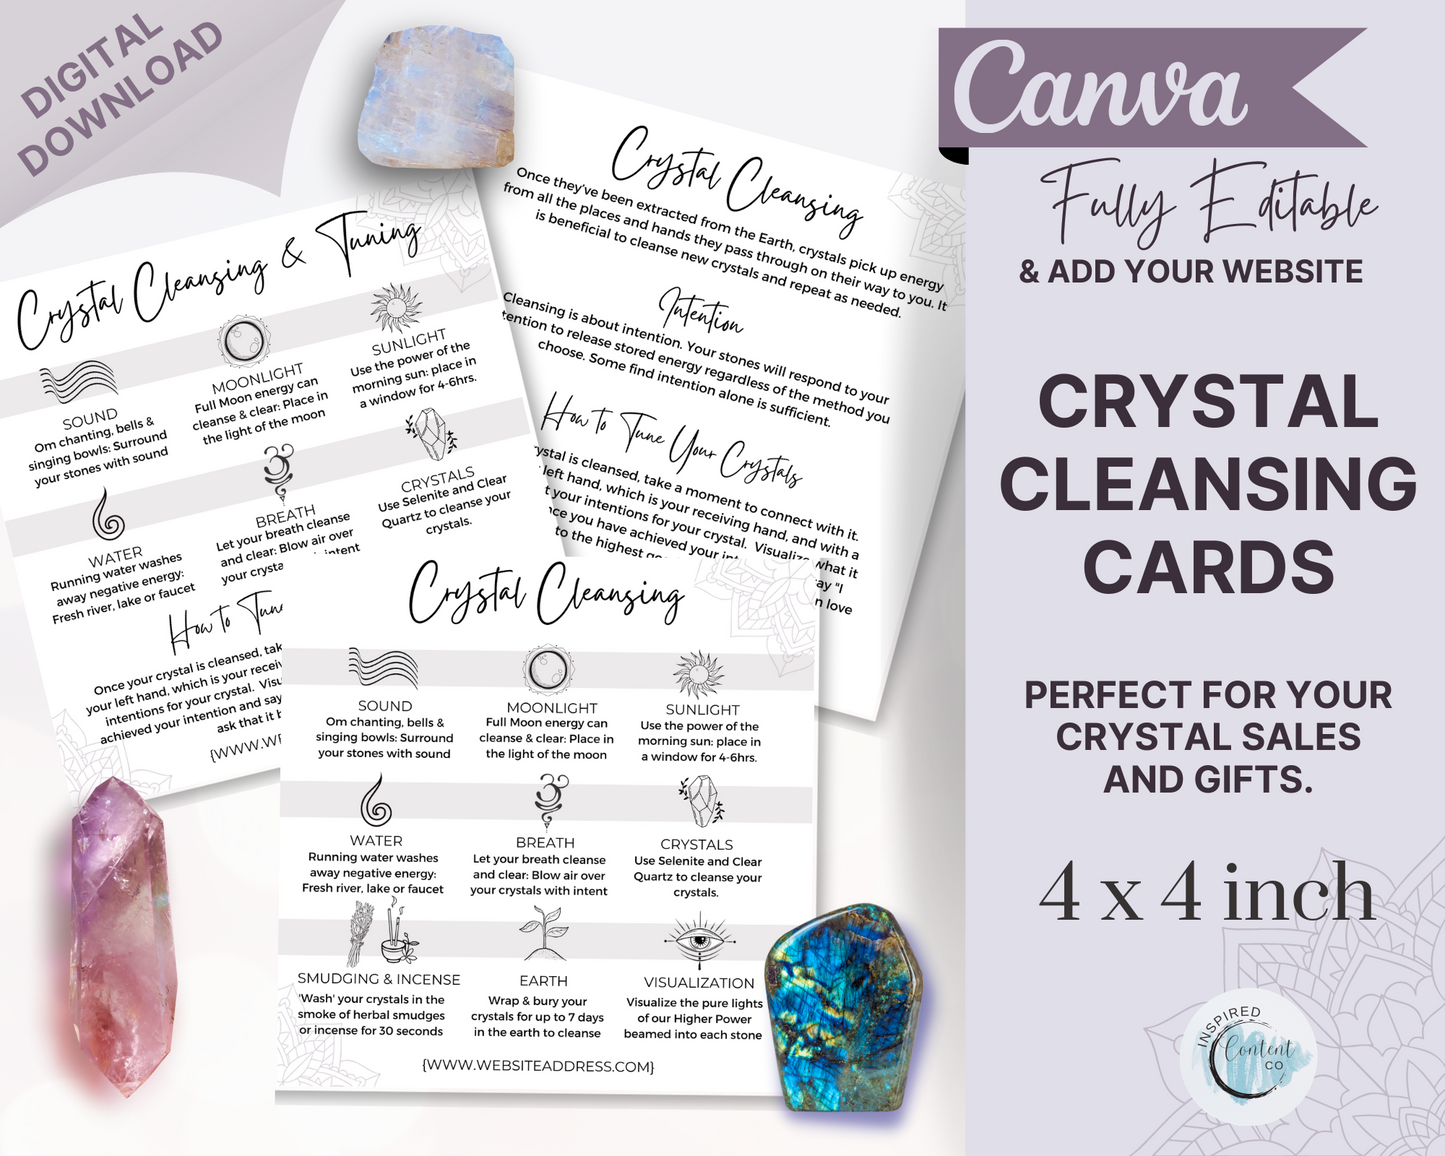 Editable Crystal Cleansing Cards, Crystal Insert Cards, How to Cleanse Your Crystals